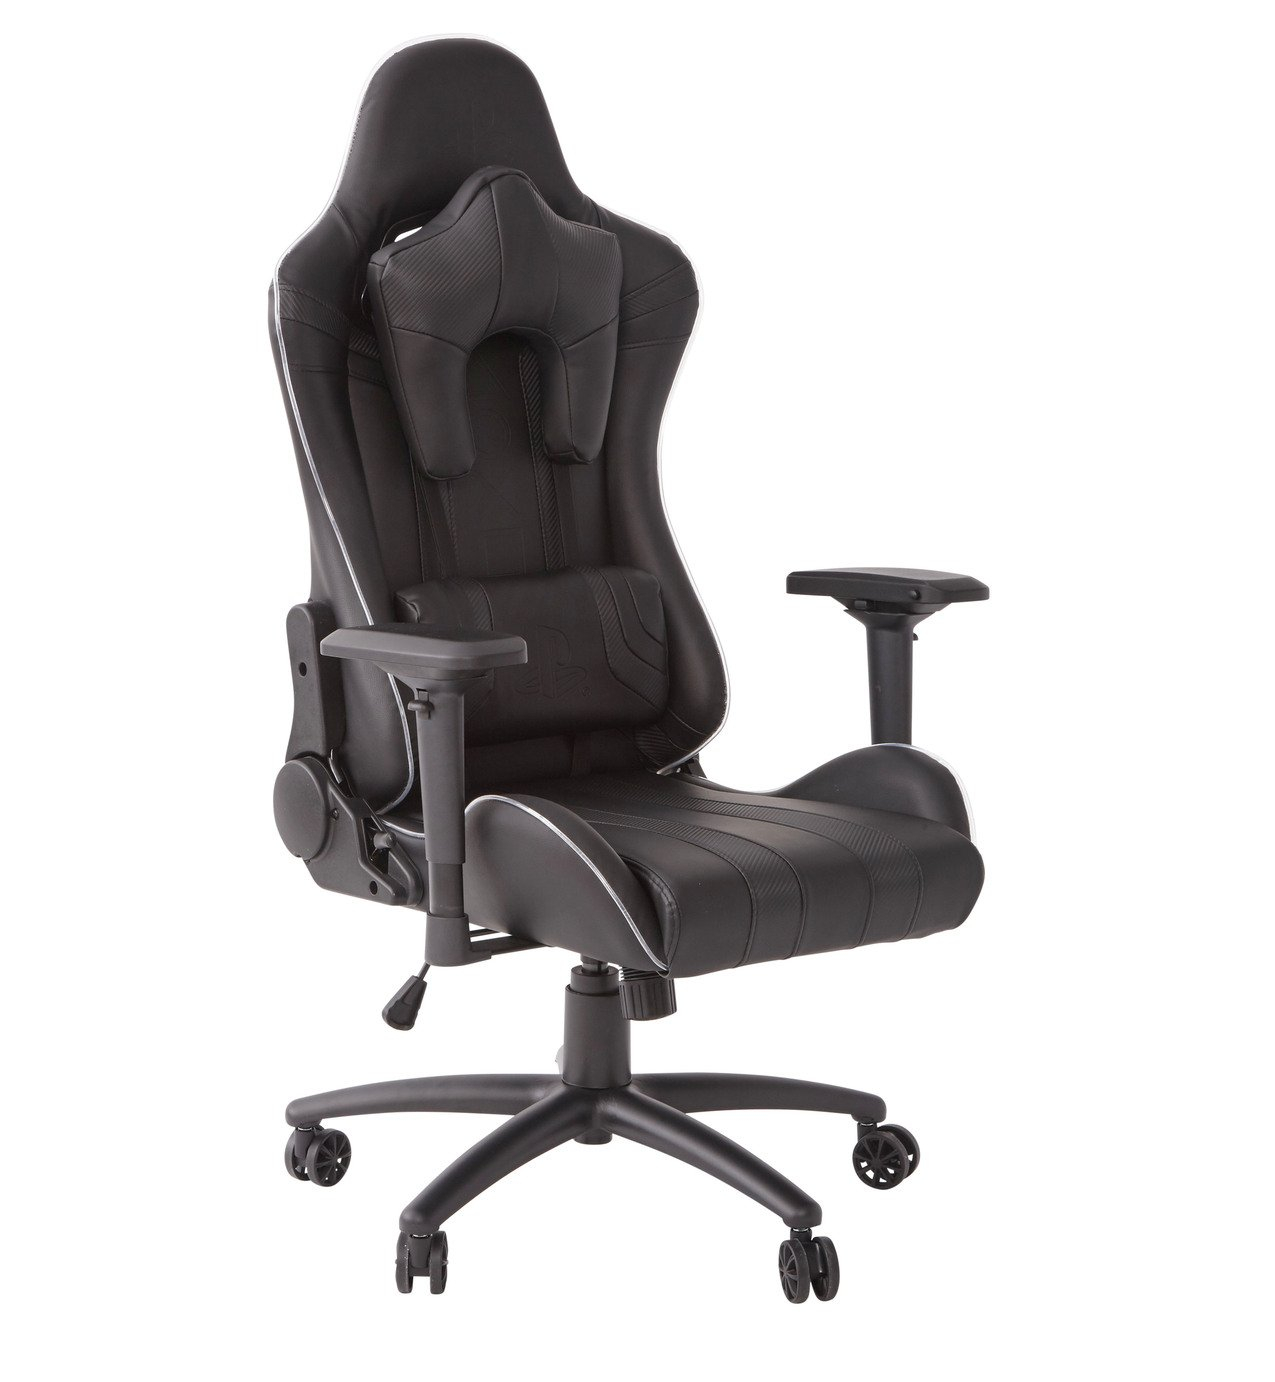 Gaming Chair Deals Cheap Price Best Sales In Uk Hotukdeals